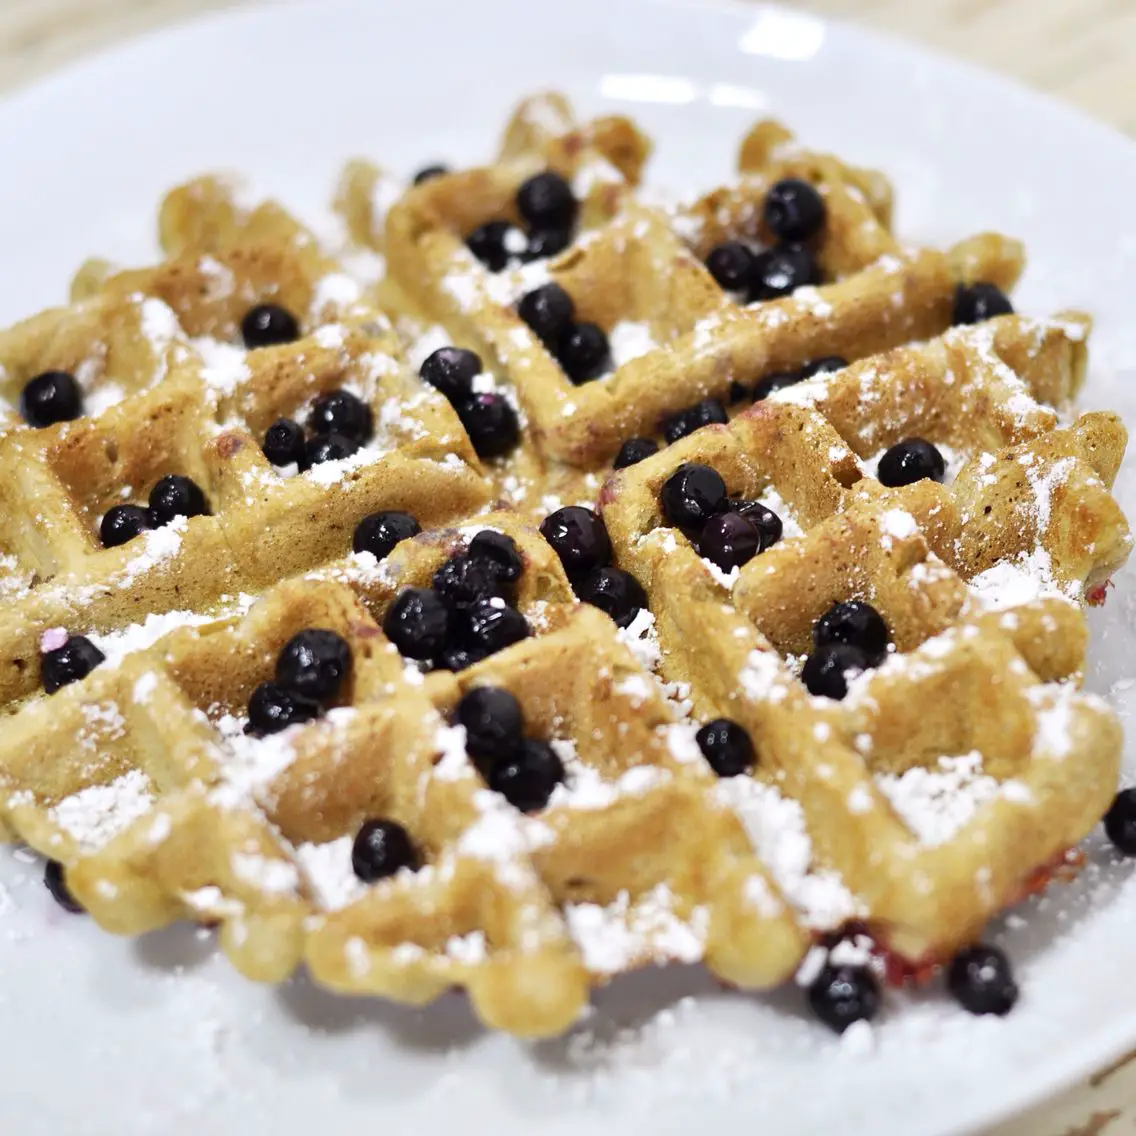 Gluten and dairy free waffles.